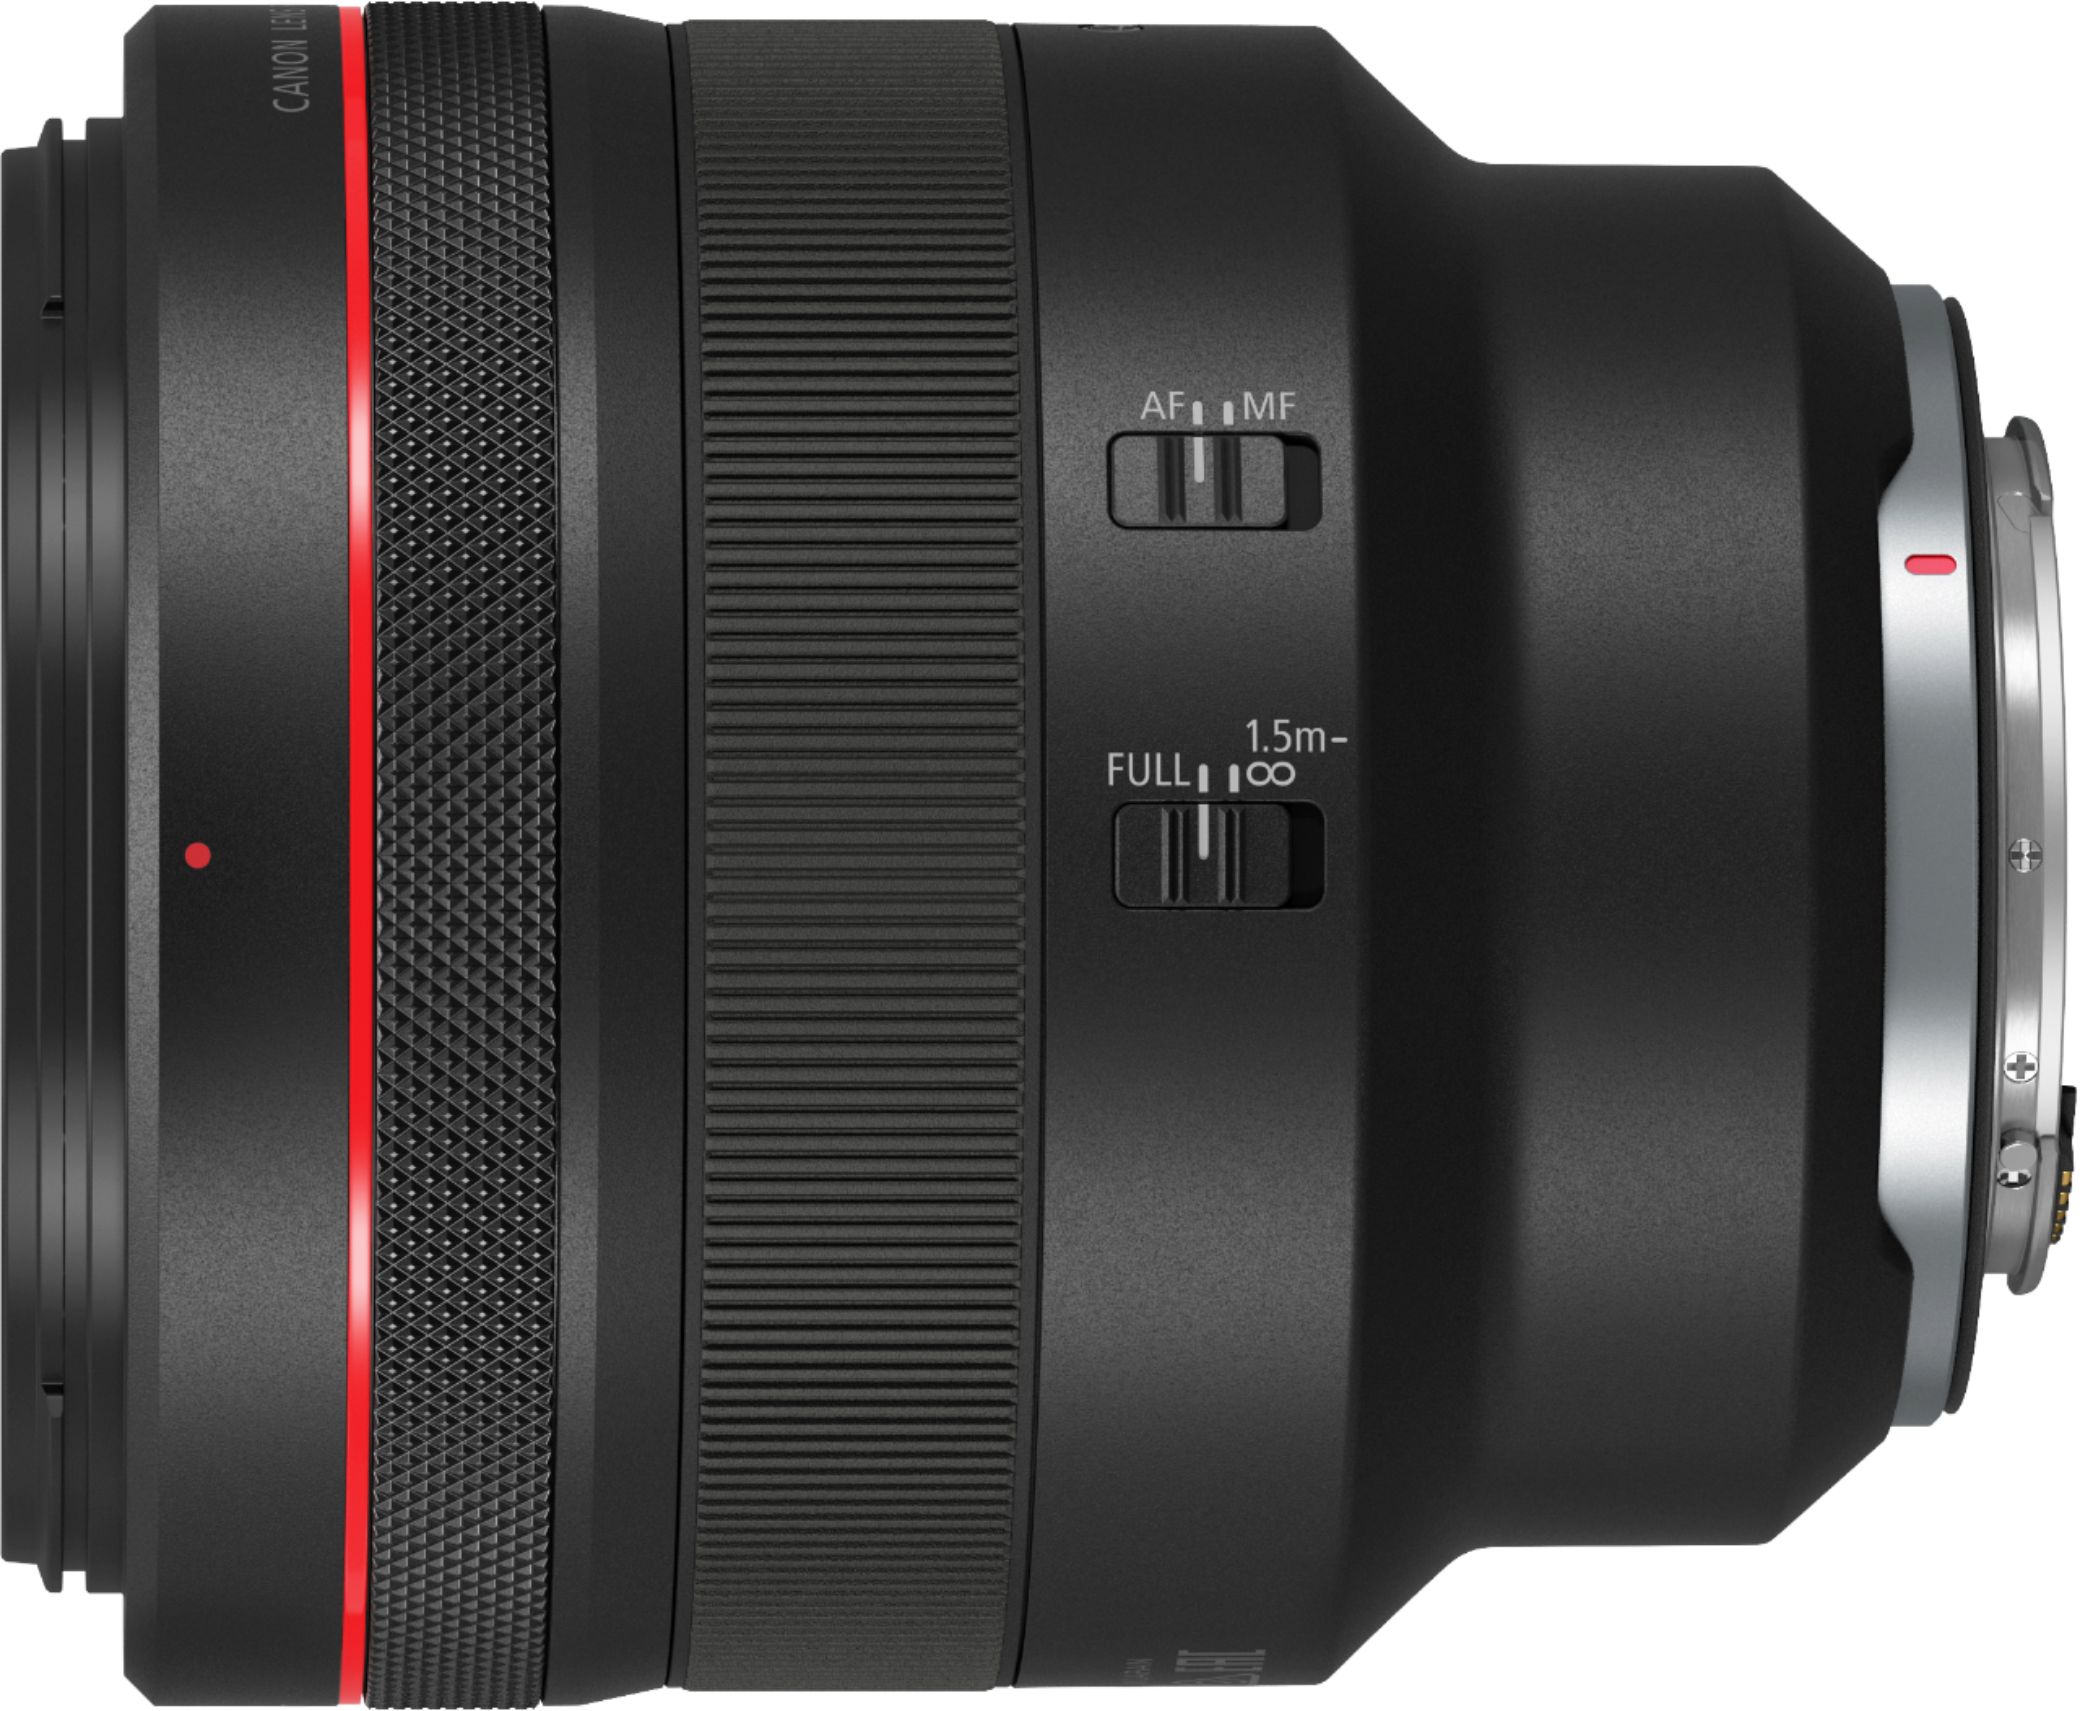 Canon RF85mm F1.2 L USM Mid-Telephoto Prime Lens for EOS R-Series 